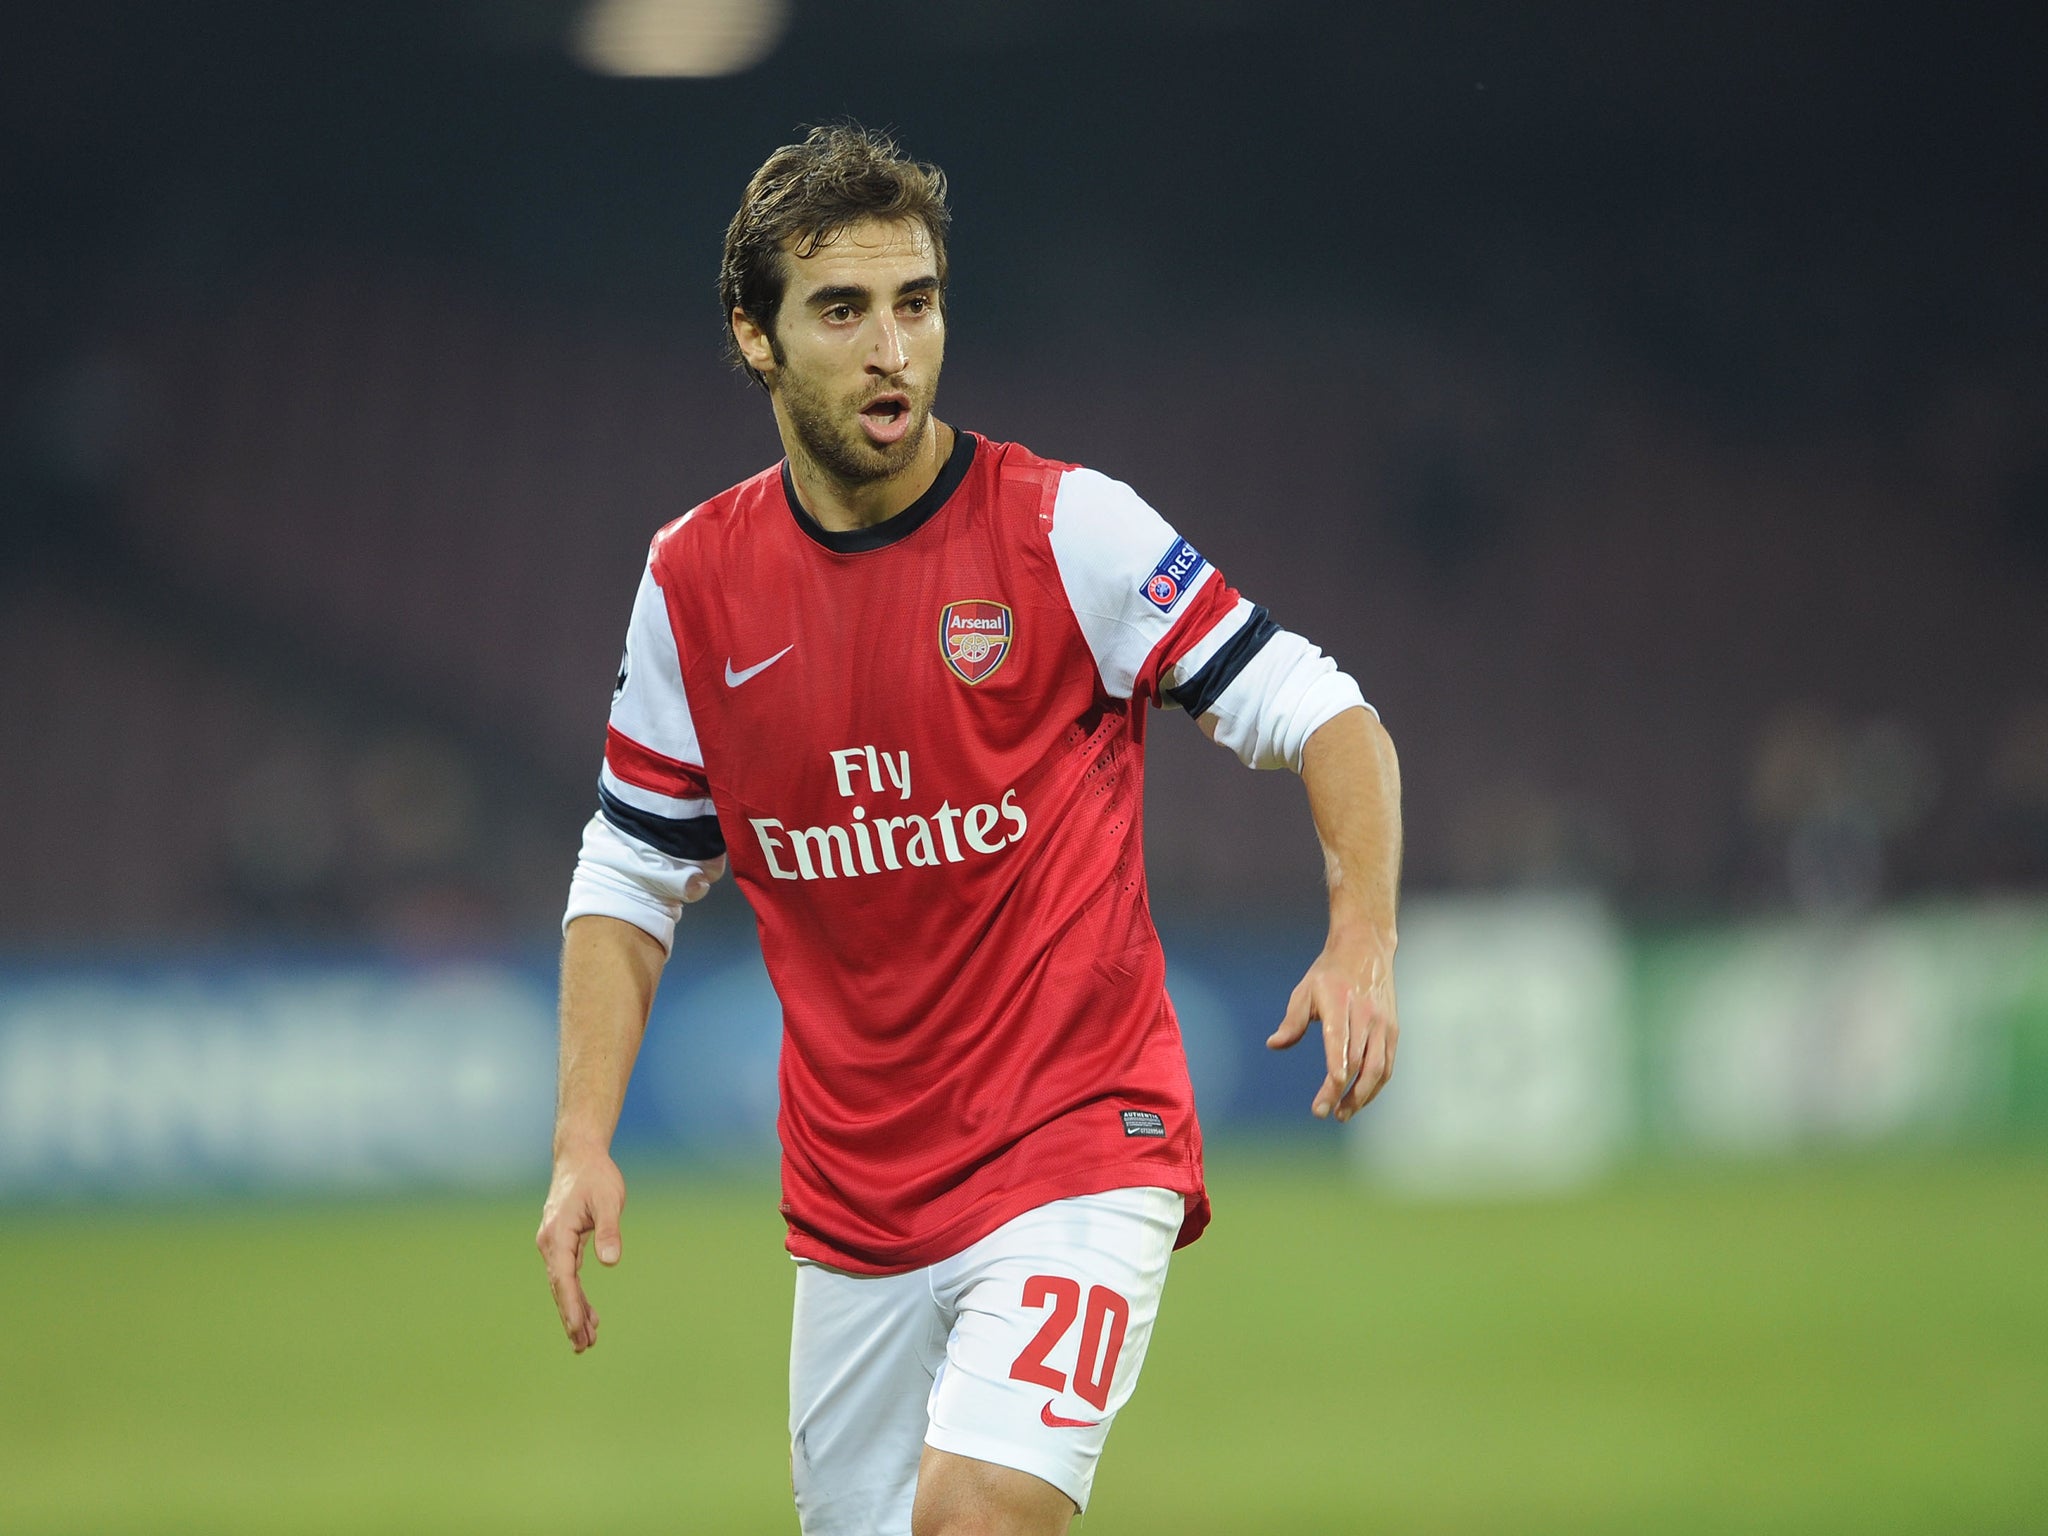 Arsenal midfielder Mathieu Flamini has praised the team for coming through Group F despite missing out on progressing as group winners